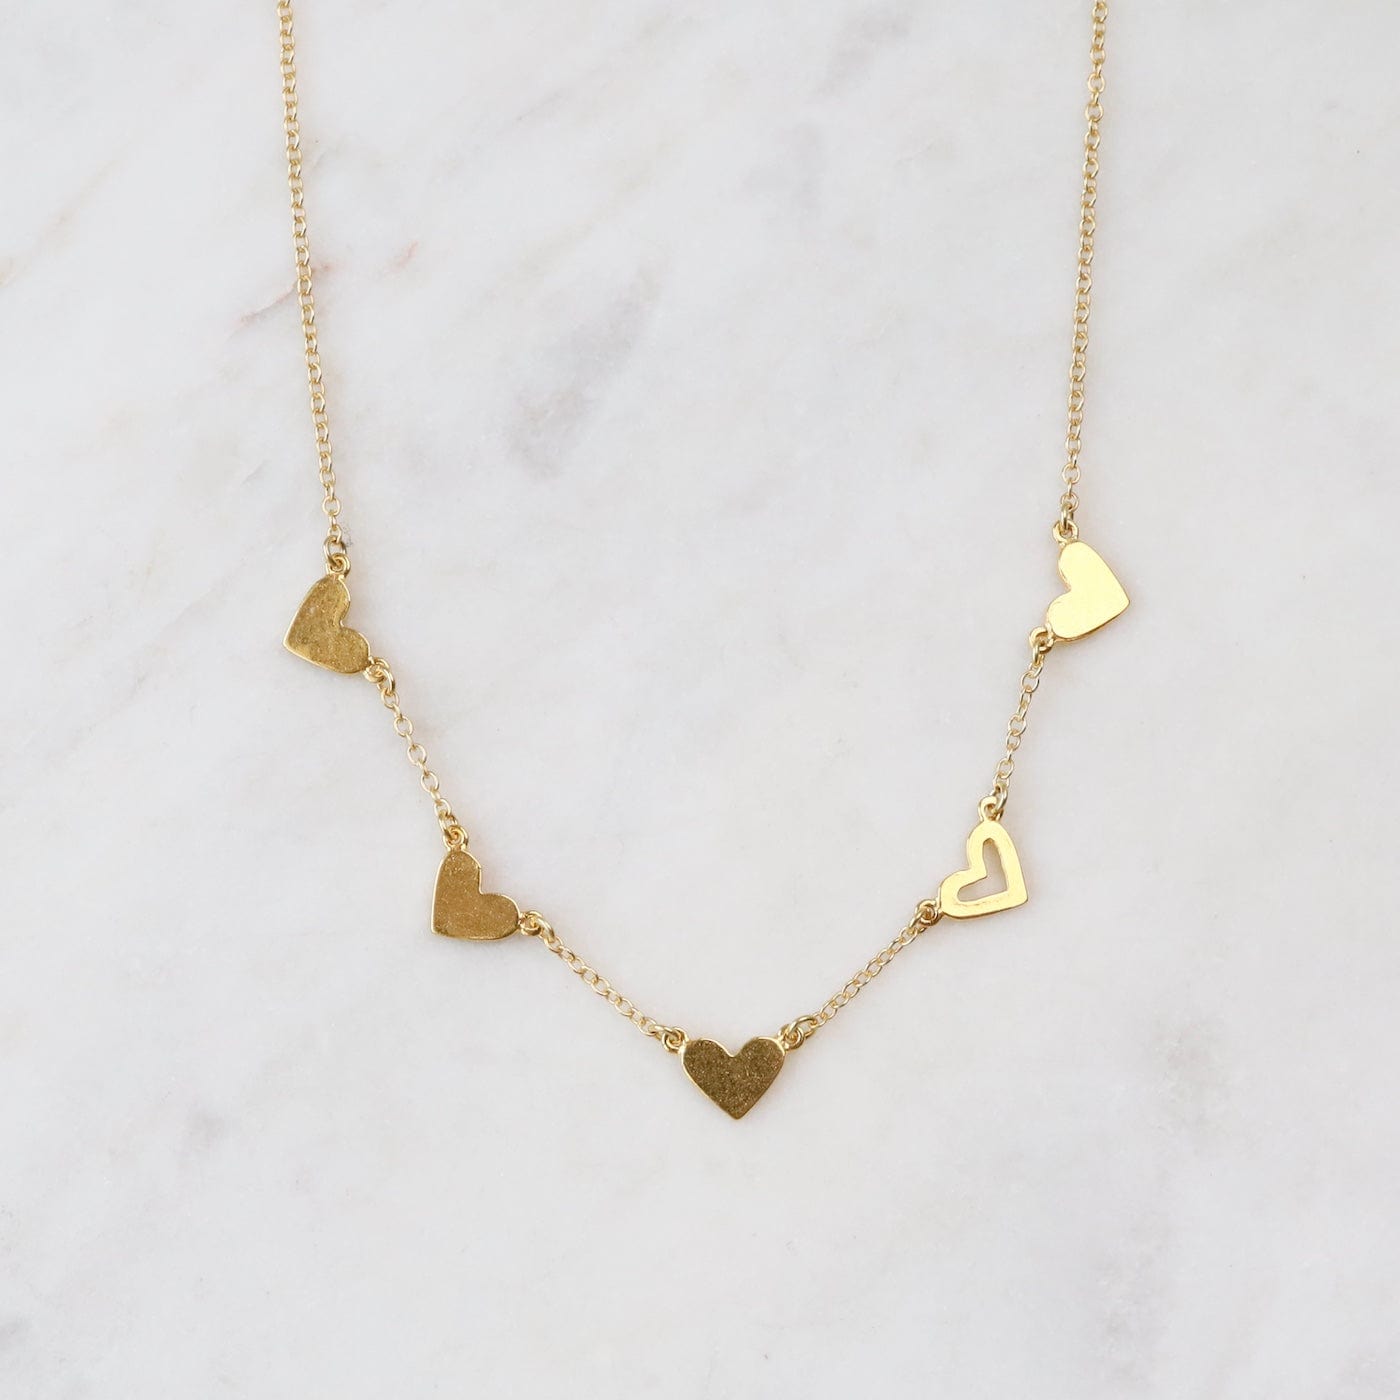 NKL-GPL String of Hearts Necklace in 18k Gold Plated Sterl